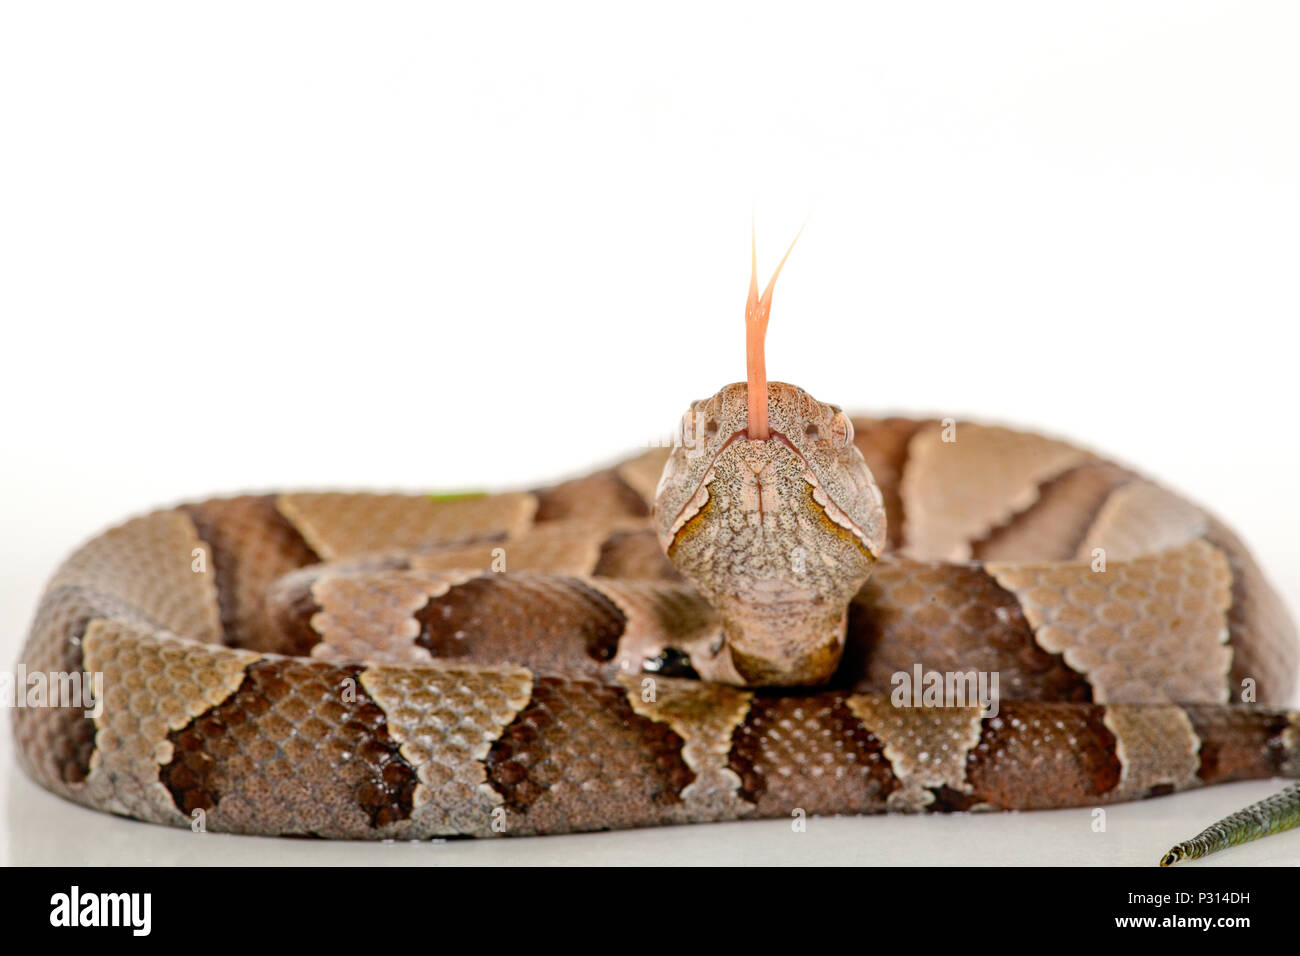 Eastern Copperhead (Agkistrodon contortrix) close-up on white background. Stock Photo